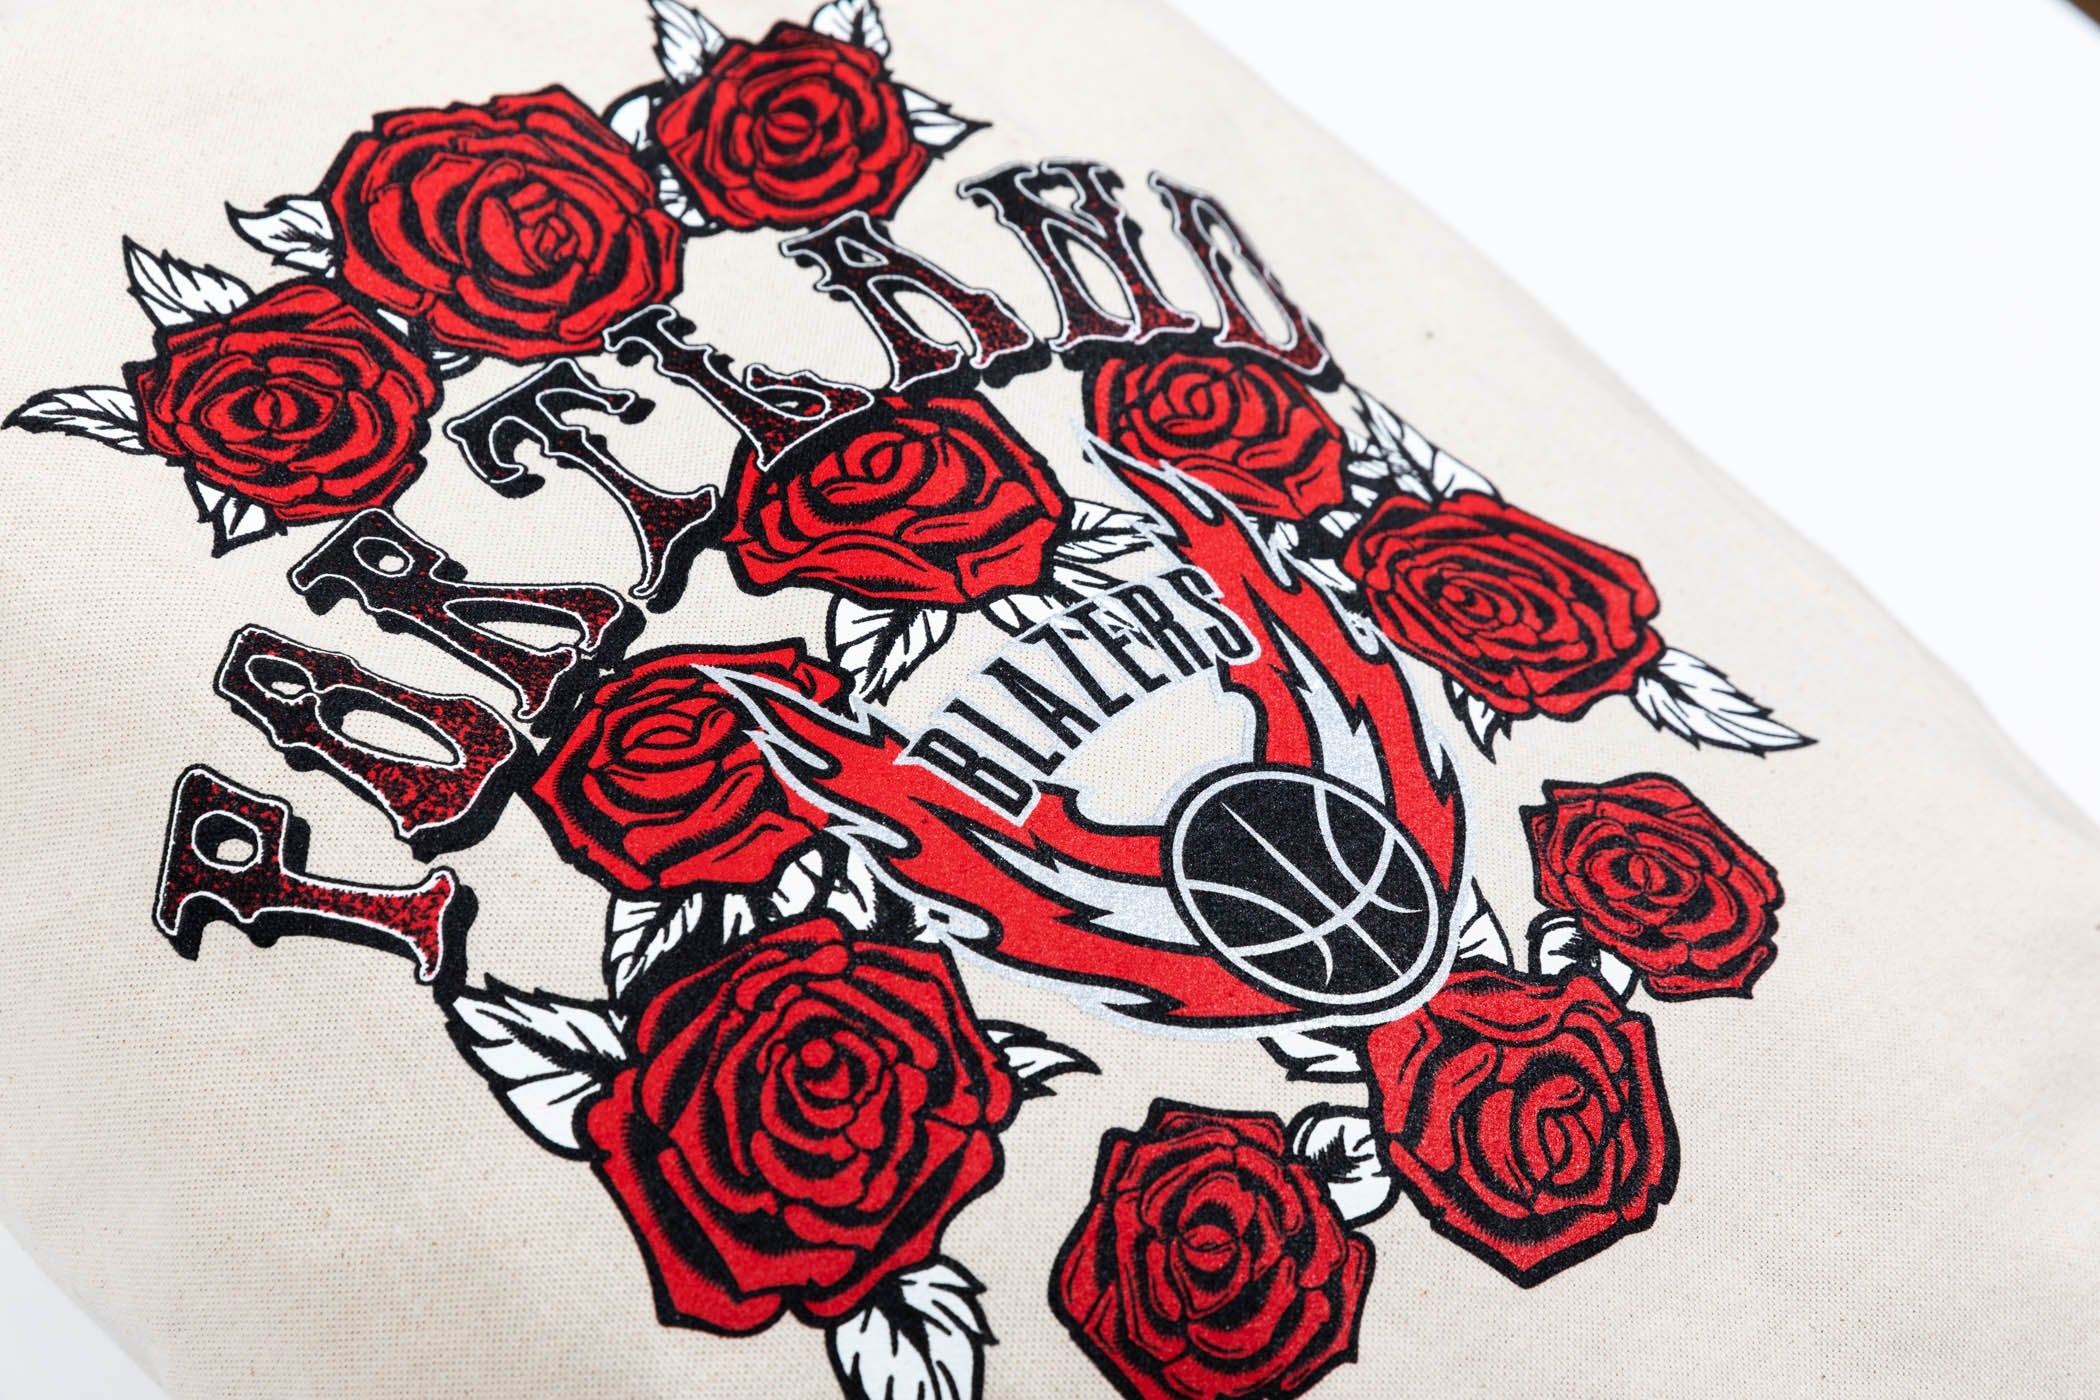 Portland Trail Blazers Mitchell & Ness Canvas Energy Psychedelic Tote Bag